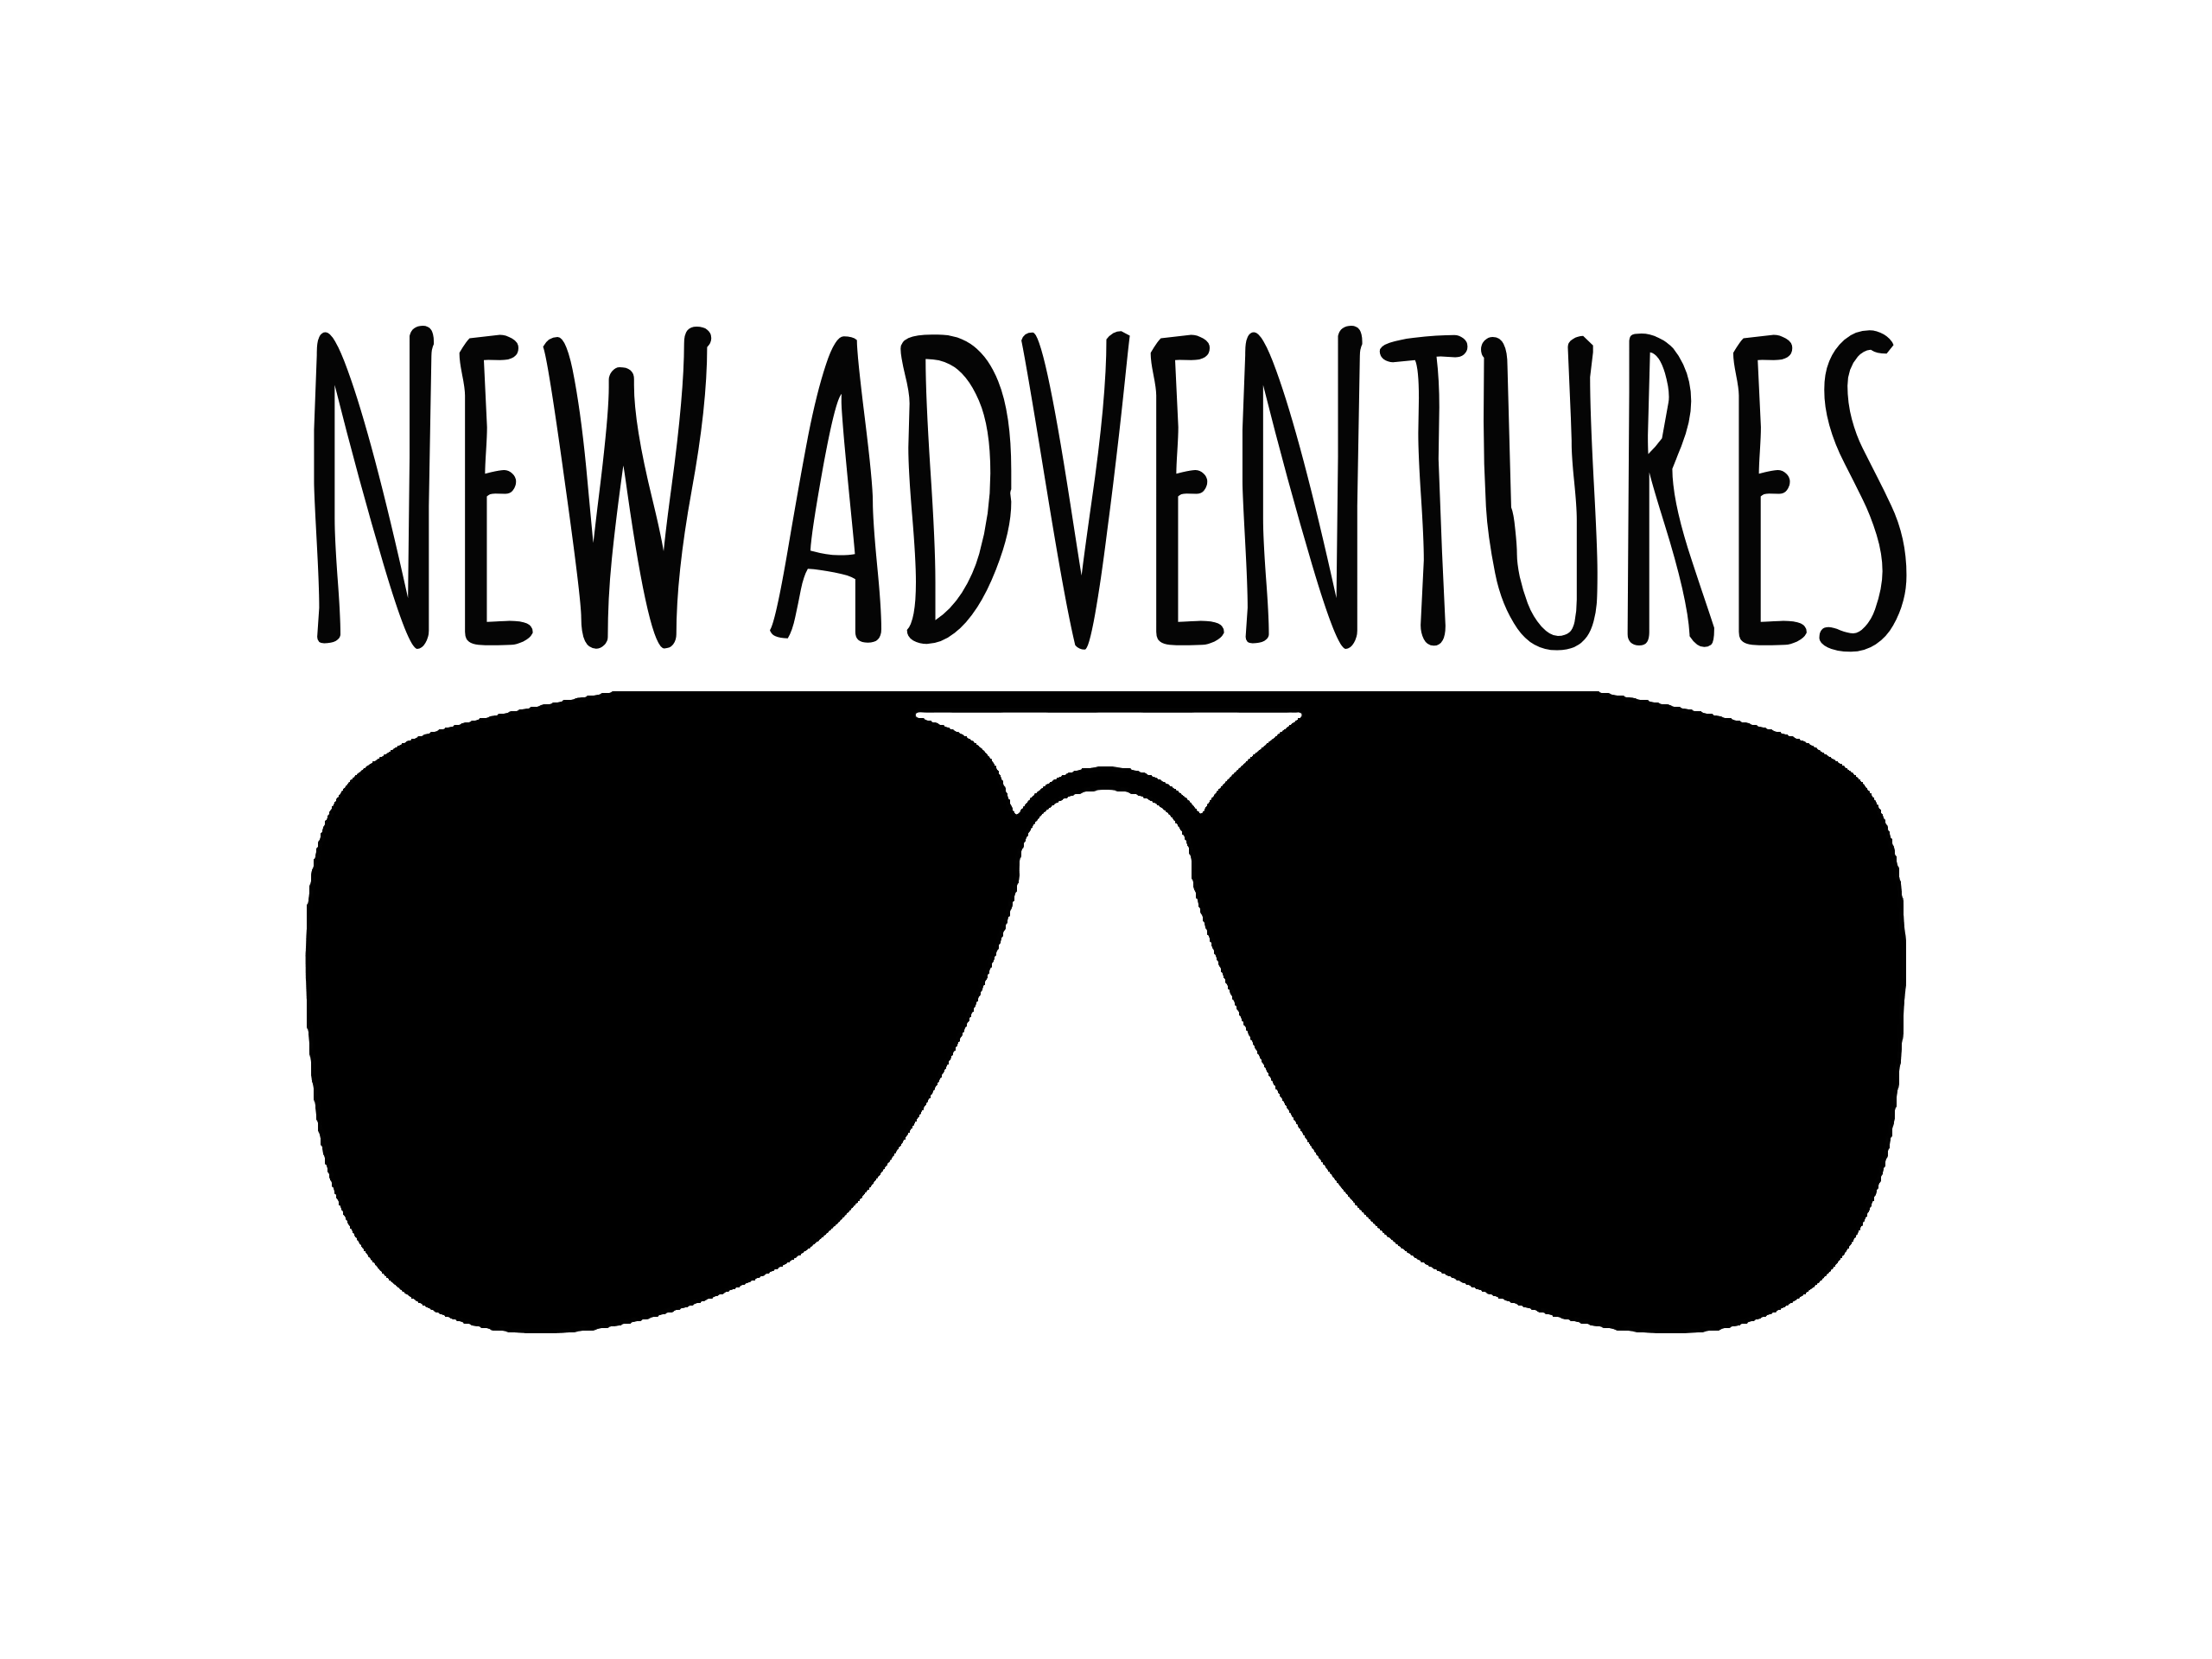 NEW ADVENTURES Sunglasses Car Decal - Permanent Vinyl Sticker for Cars, Vehicle, Doors, Windows, Laptop, and more!